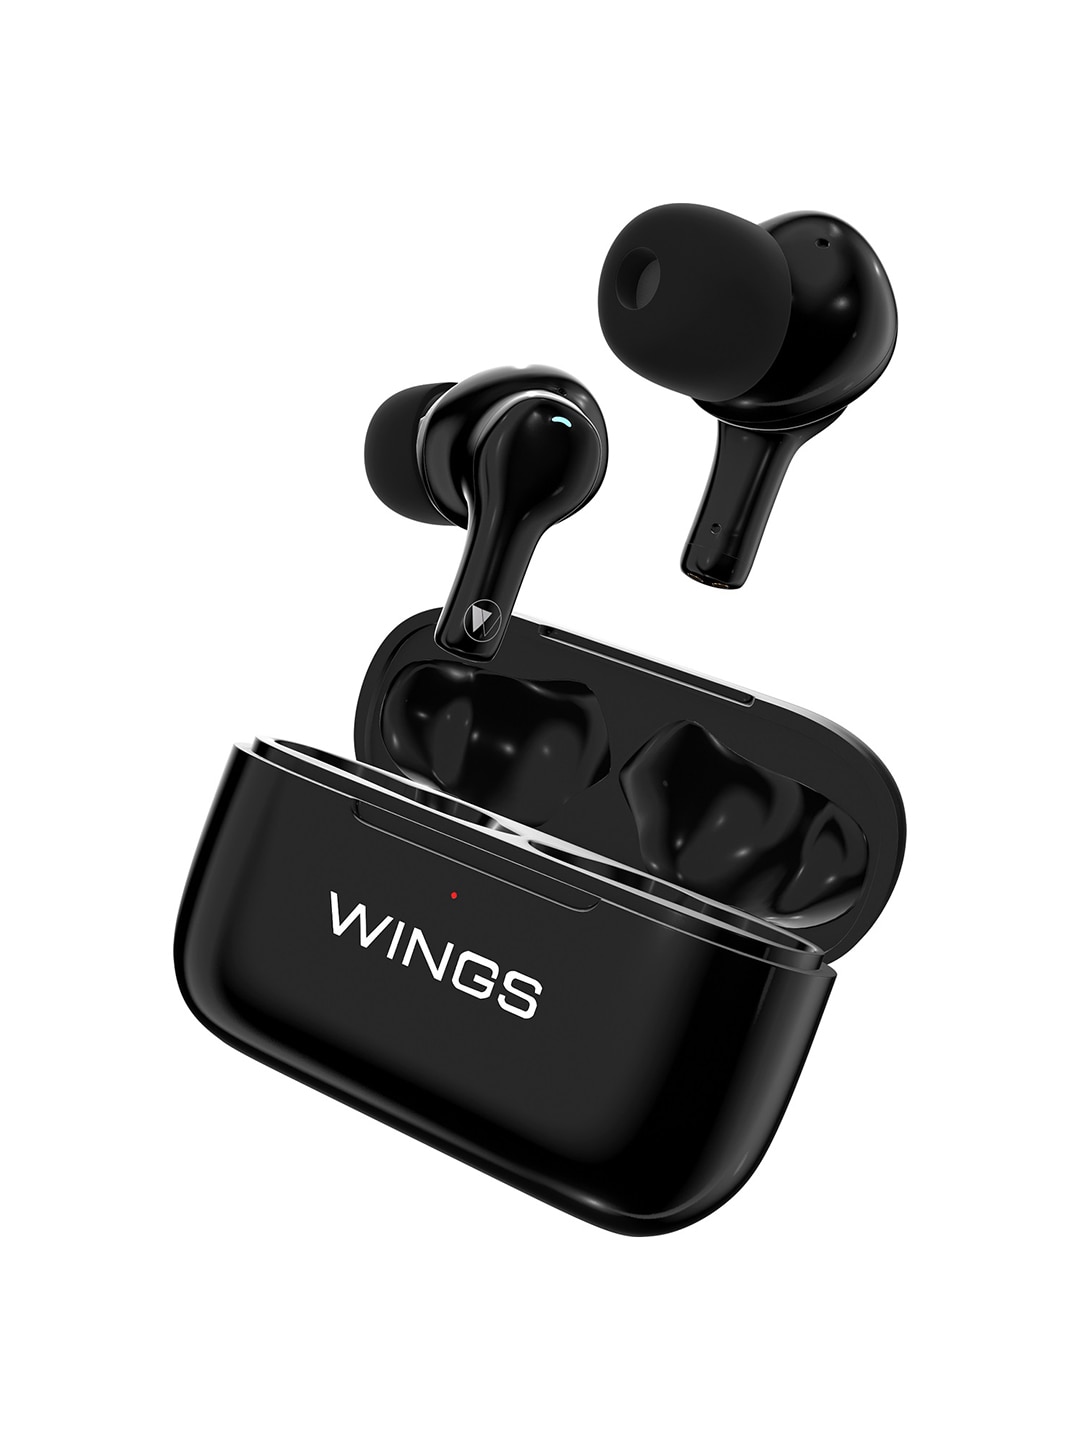 WINGS Bassdrops 100 with Active Noise Cancellation Bluetooth Headset - Black Price in India